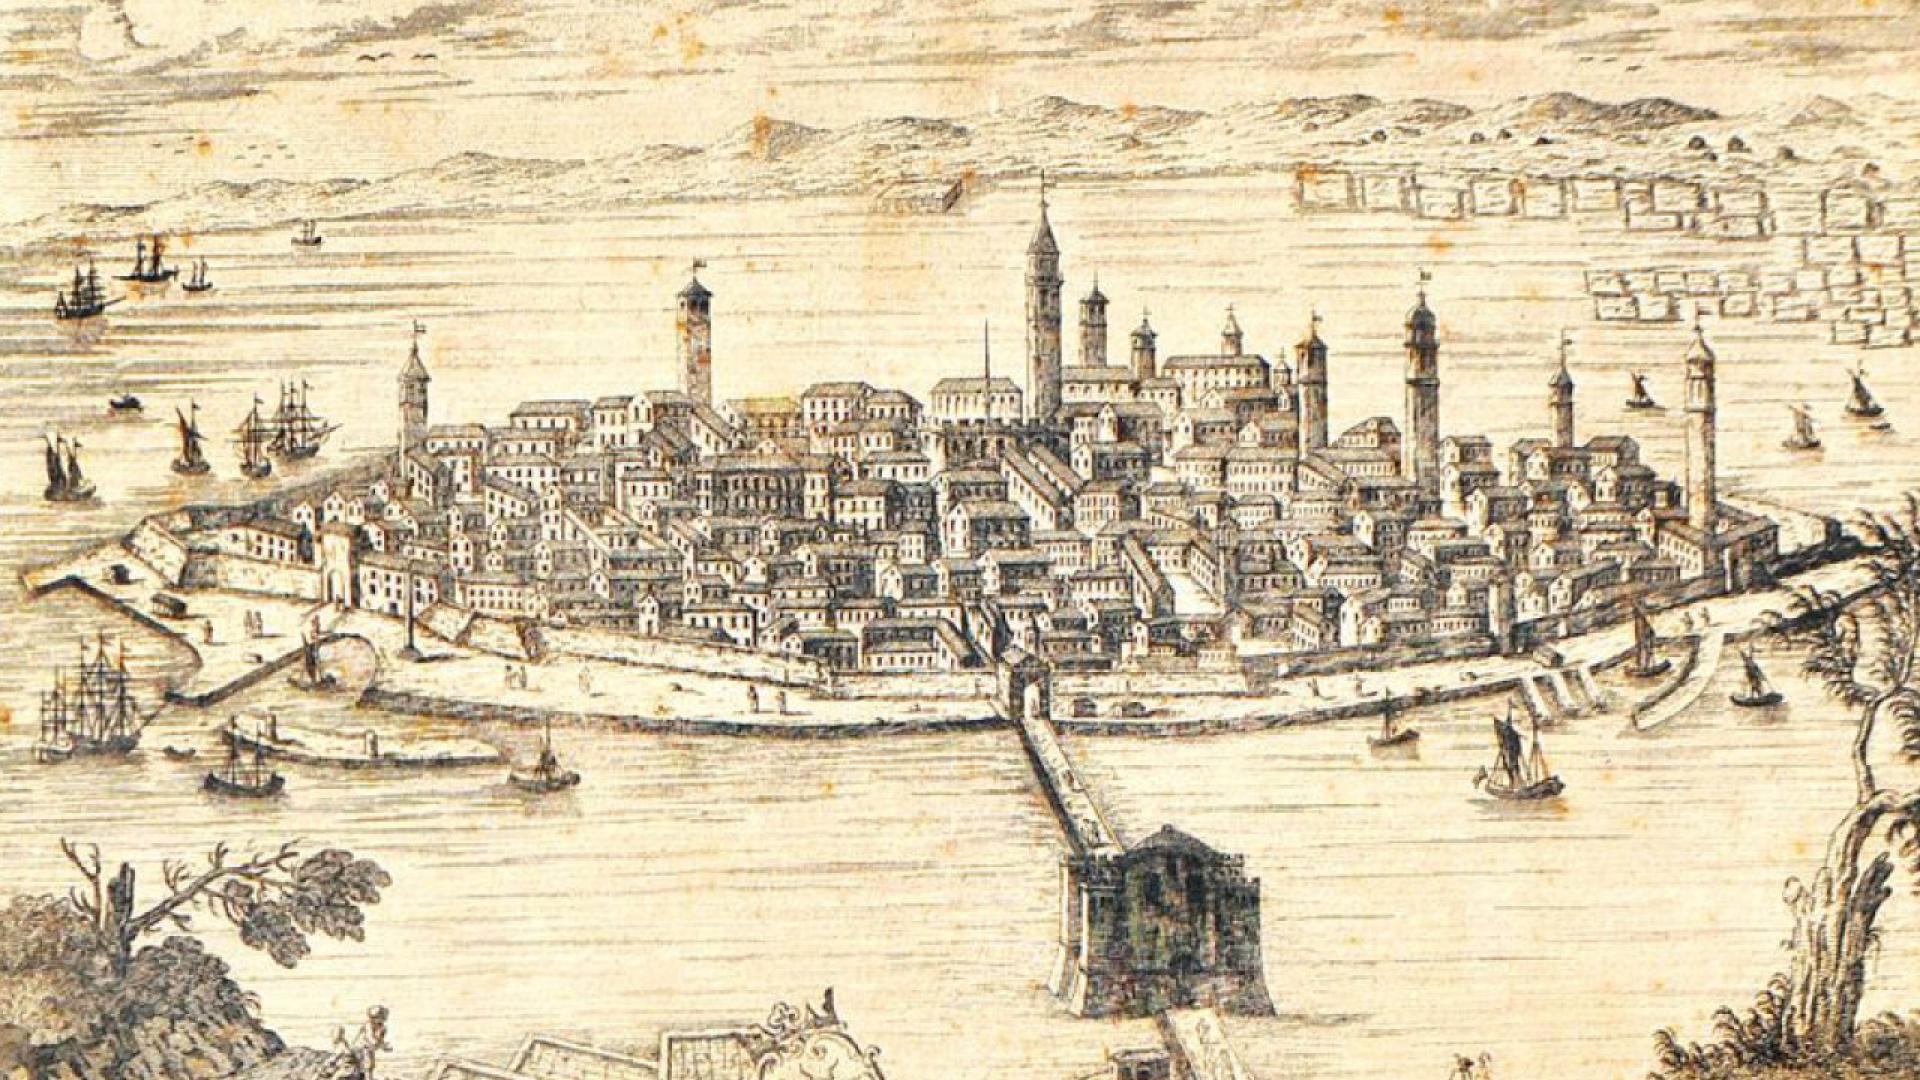 A drawing by F. del Pedro, M. S. Giampiccoli from 1781, when the city on the island developed into a political and administrative centre during the Venetian Republic “La Serenissima”. | Source Regional Archive Koper